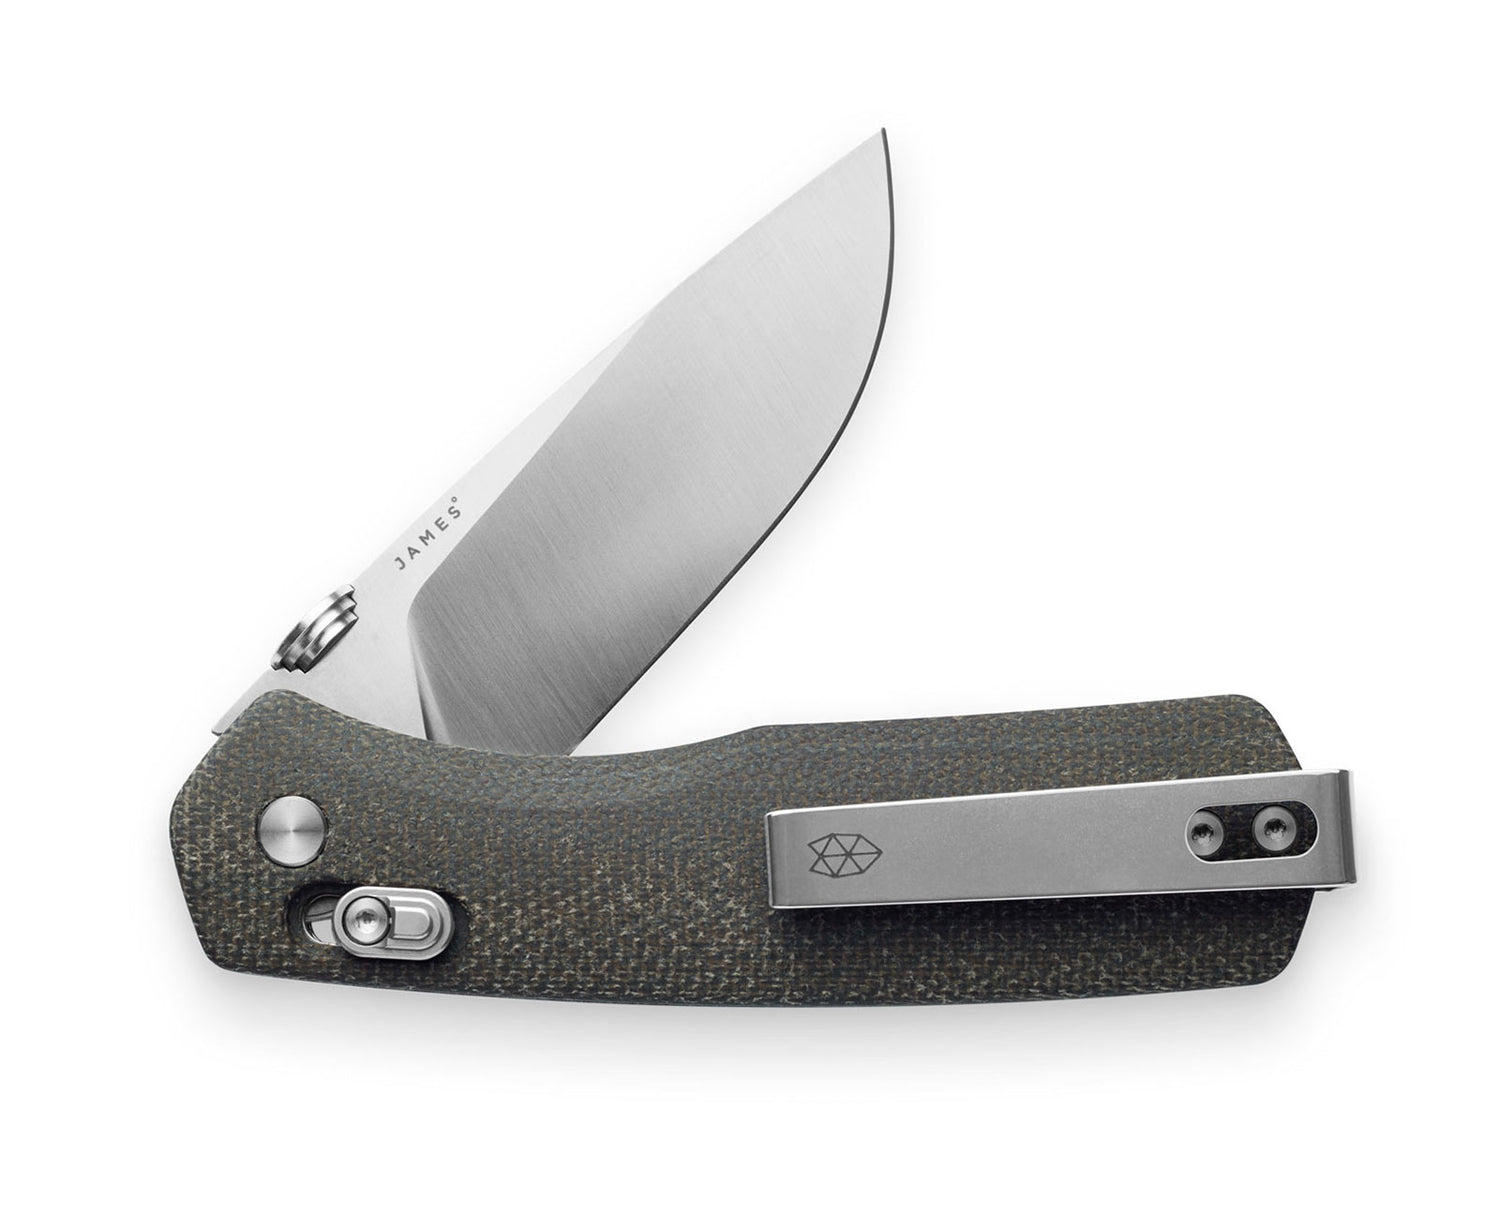 The Carter knife with OD green micarta handle and stainless steel blade.